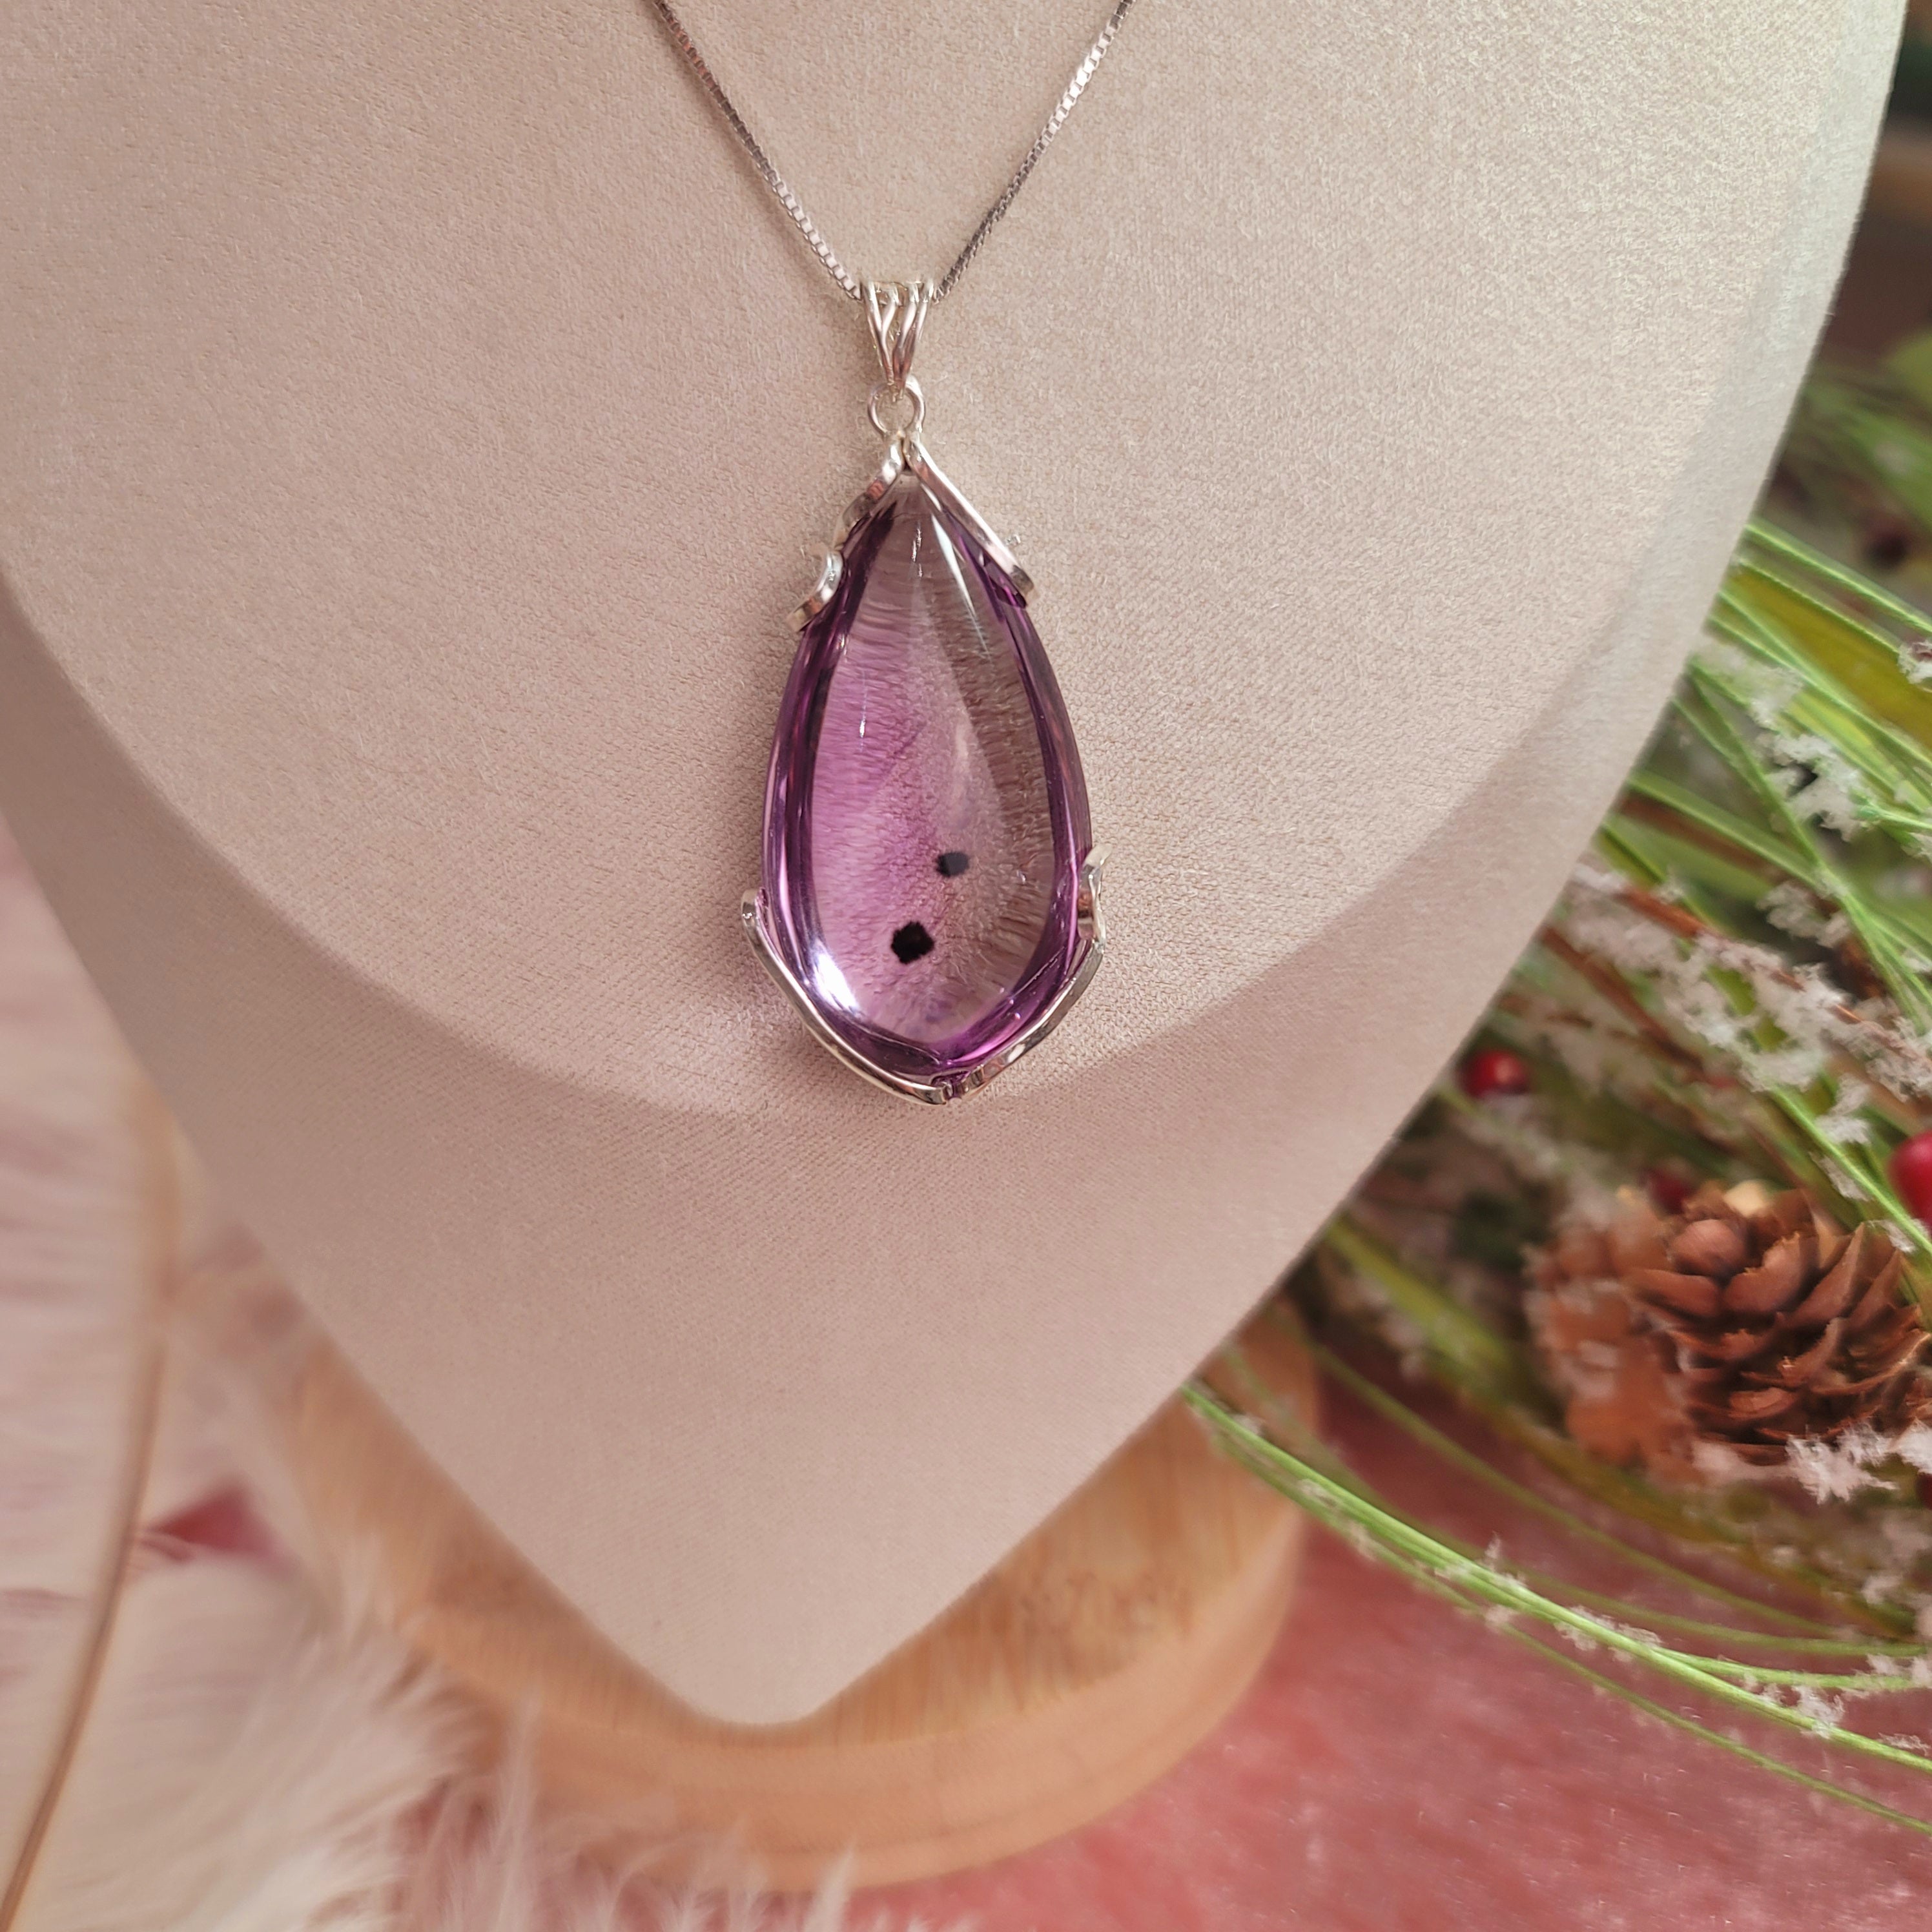 Amethyst with Hollandite Inclusion Necklace for Intuition and Protection